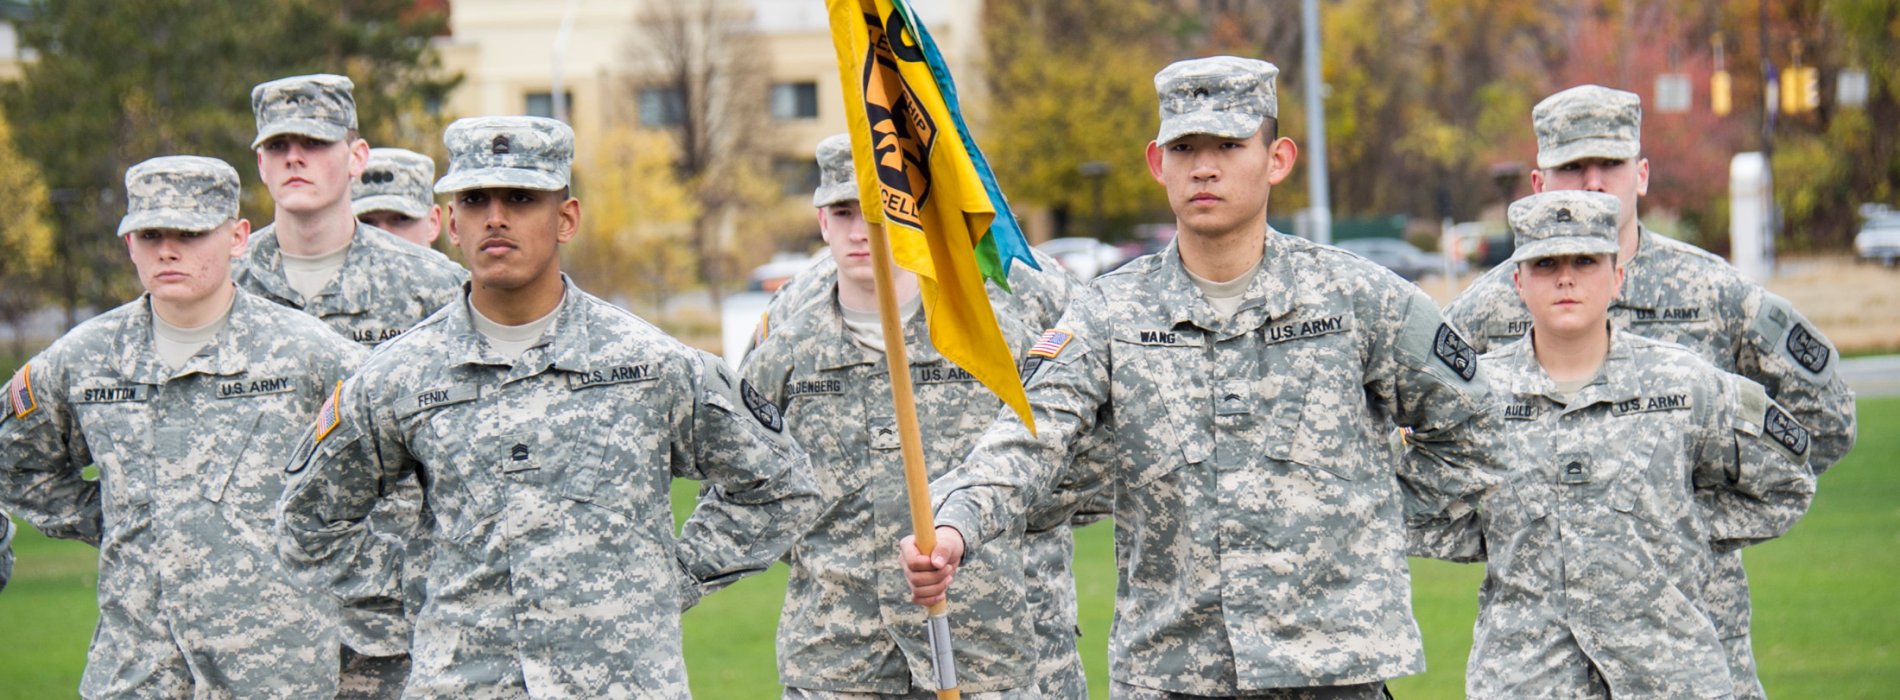 A group of students wearing ROTC fatigues stand in formation. One student is holding a yellow flag.